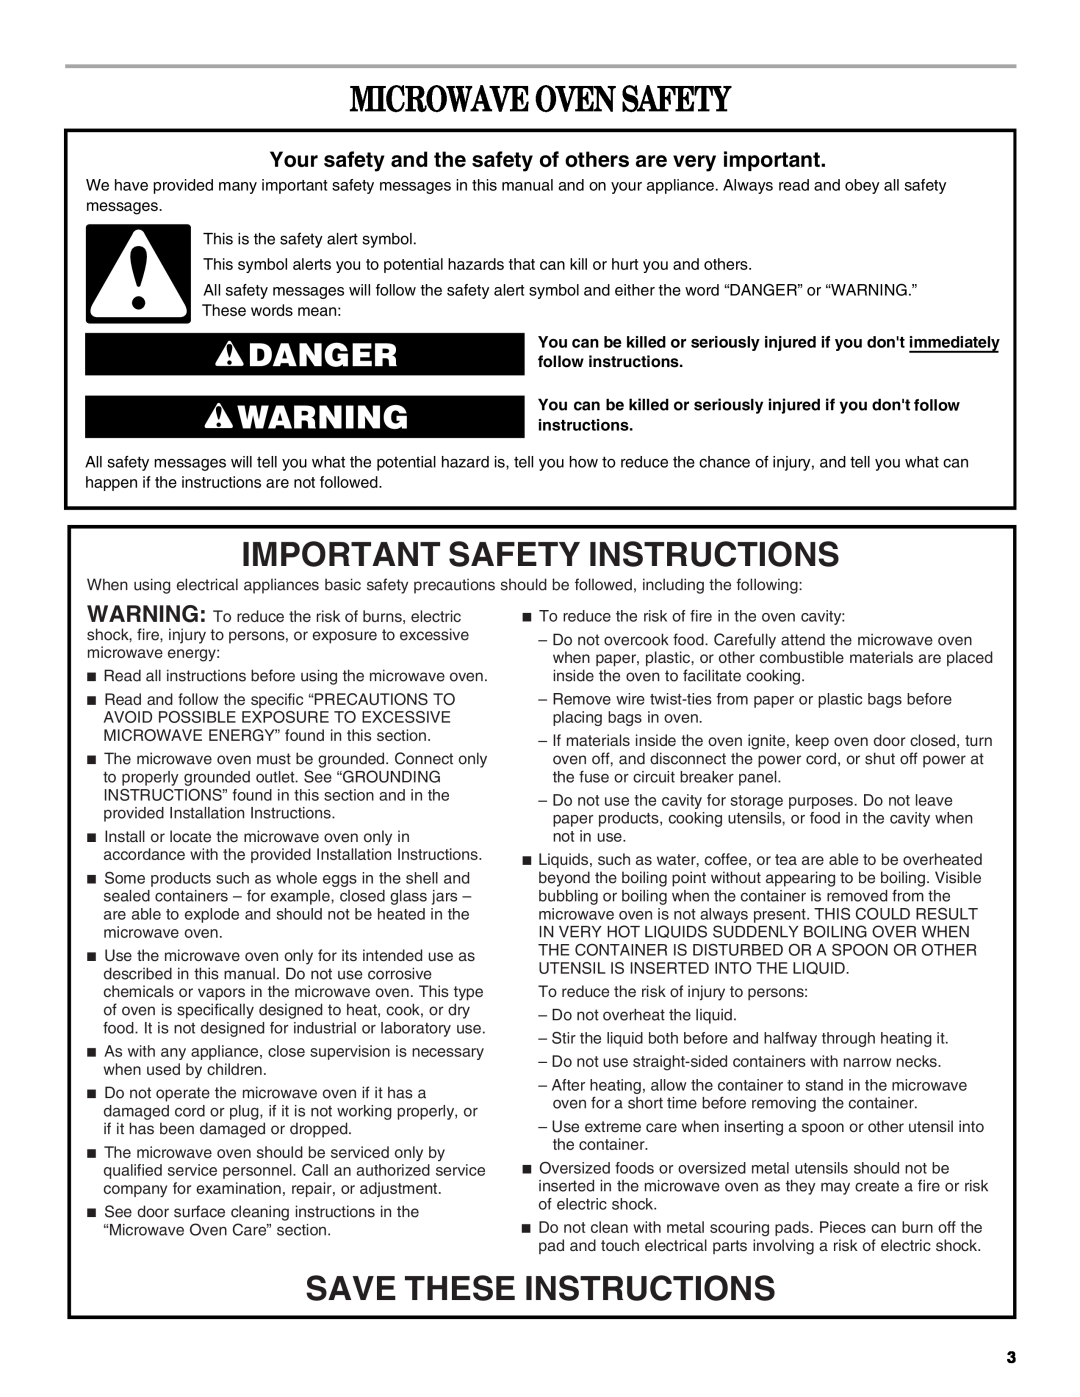 Whirlpool WMC1070 manual Microwave Oven Safety, Important Safety Instructions, Save These Instructions, Danger 